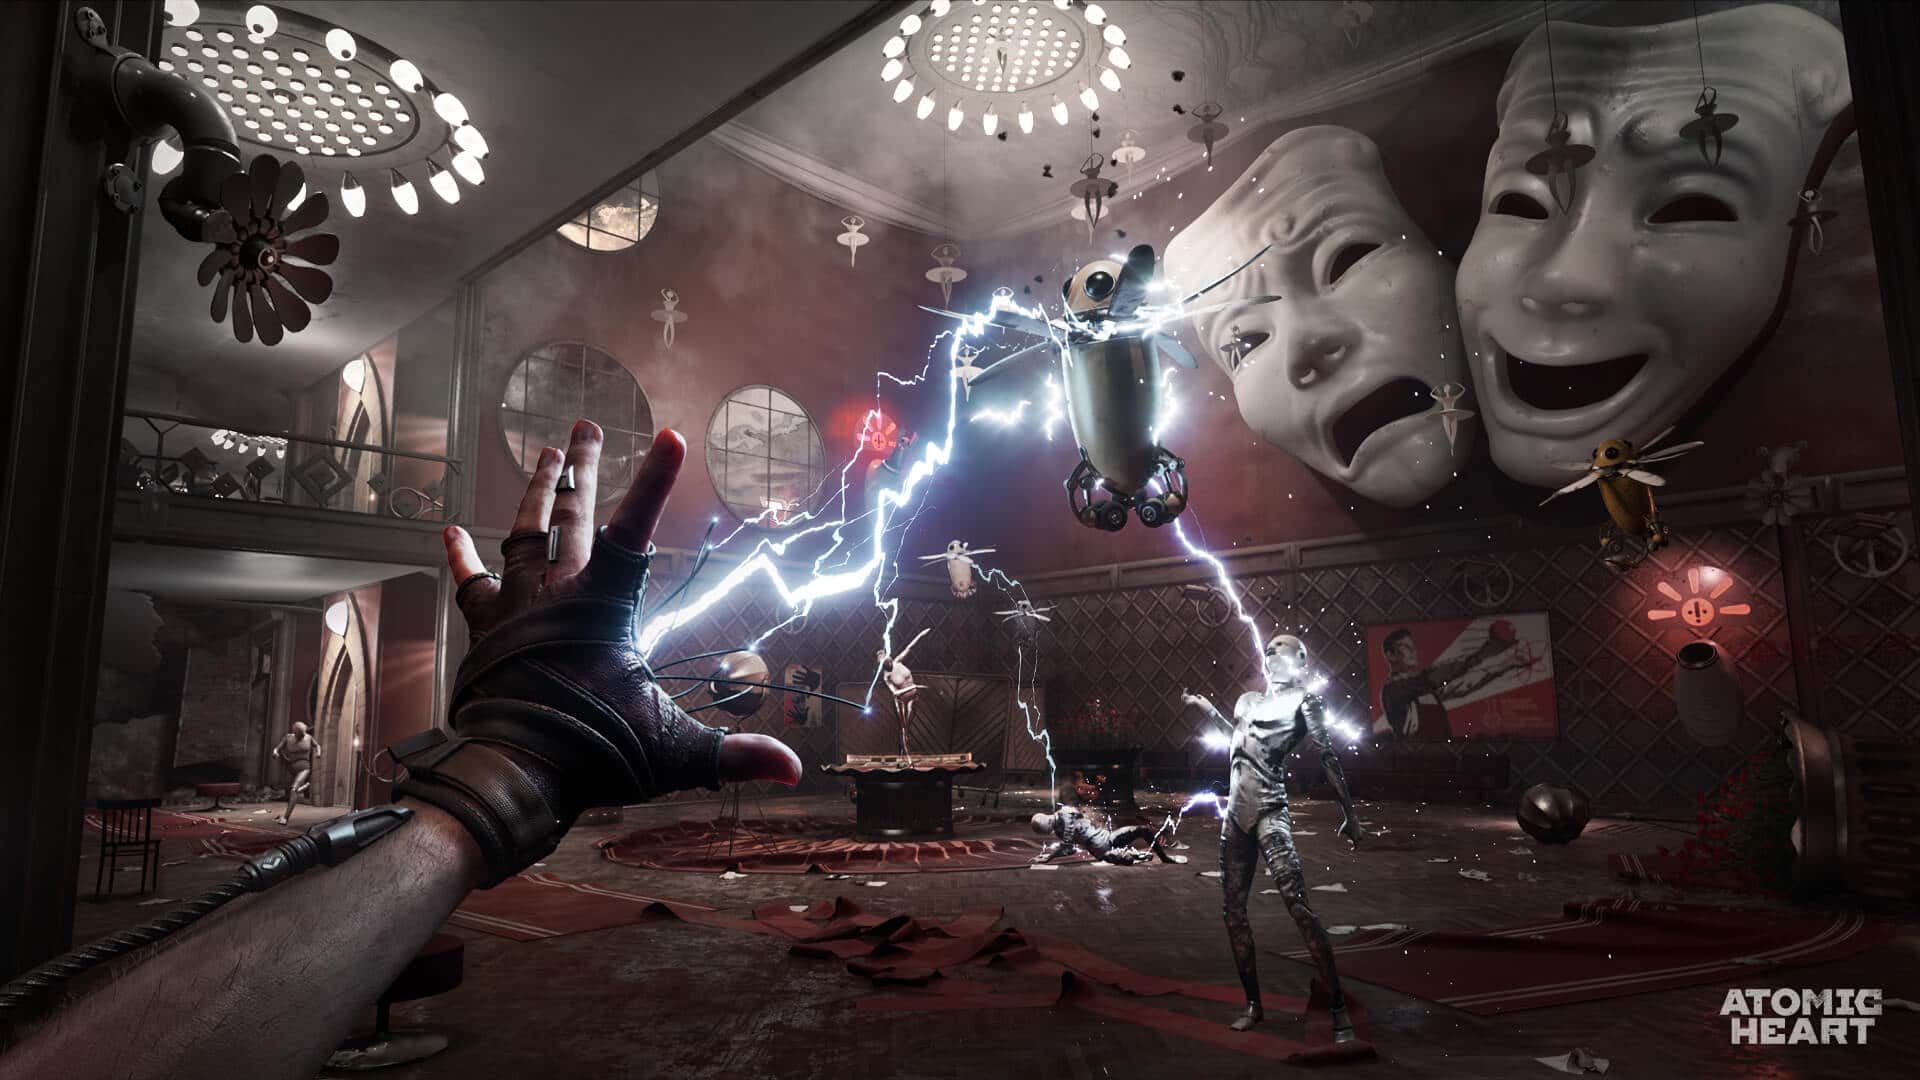 An image showing off the electro-shock powers and combat in Atomic Heart